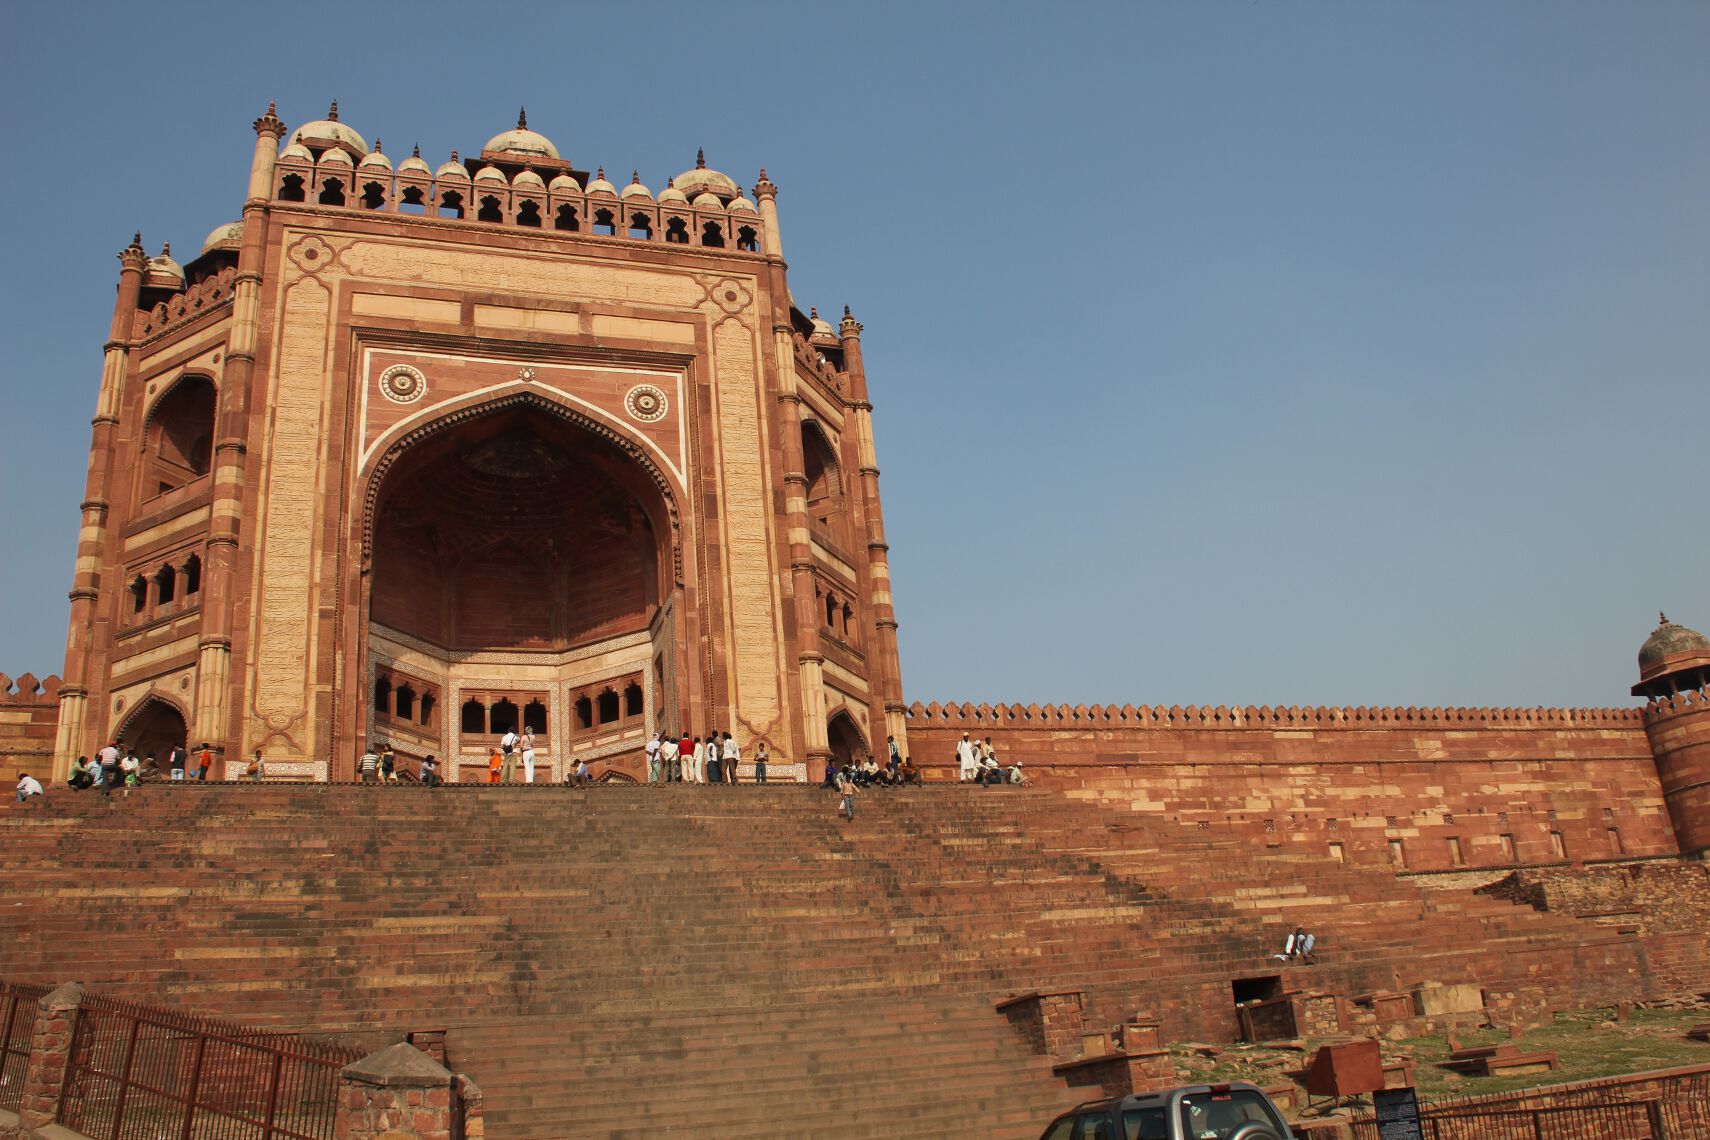 The entrance gate to Fatehpur Sikri, an ancient city that once served as the Mughal Empire's capital.